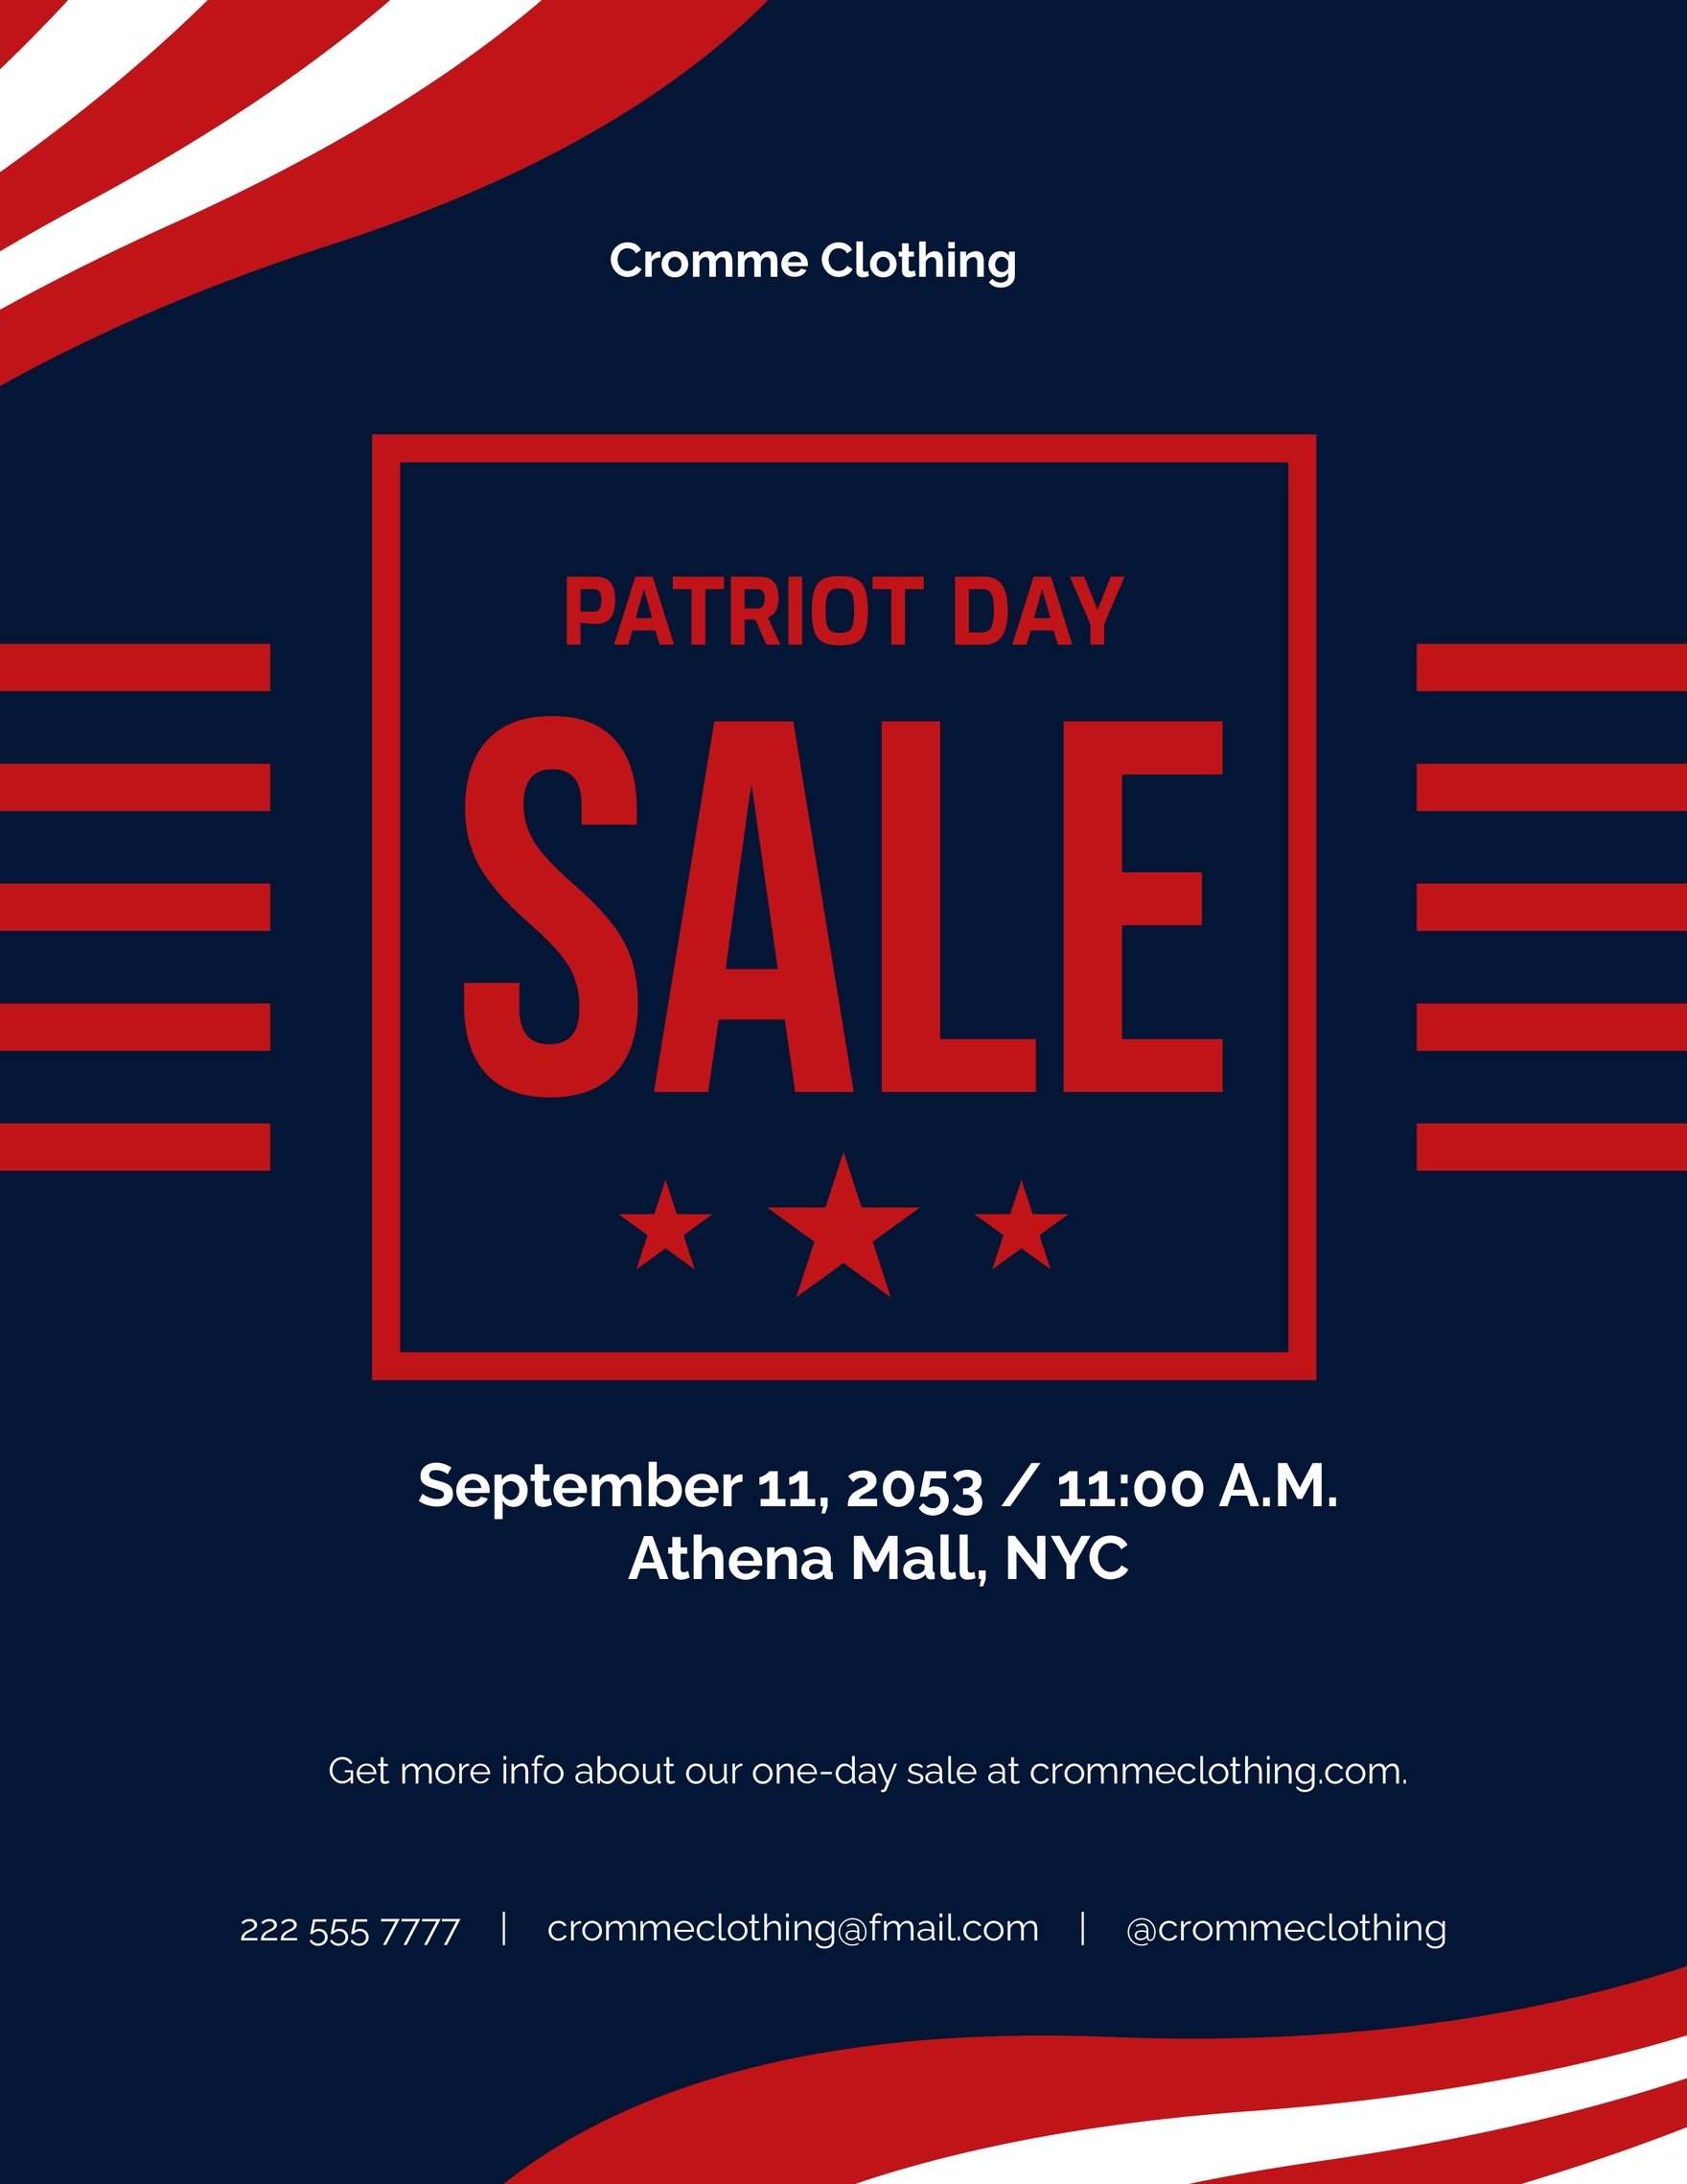 Free Patriot Day Sale Flyer in Word, Google Docs, Illustrator, PSD, Apple Pages, Publisher